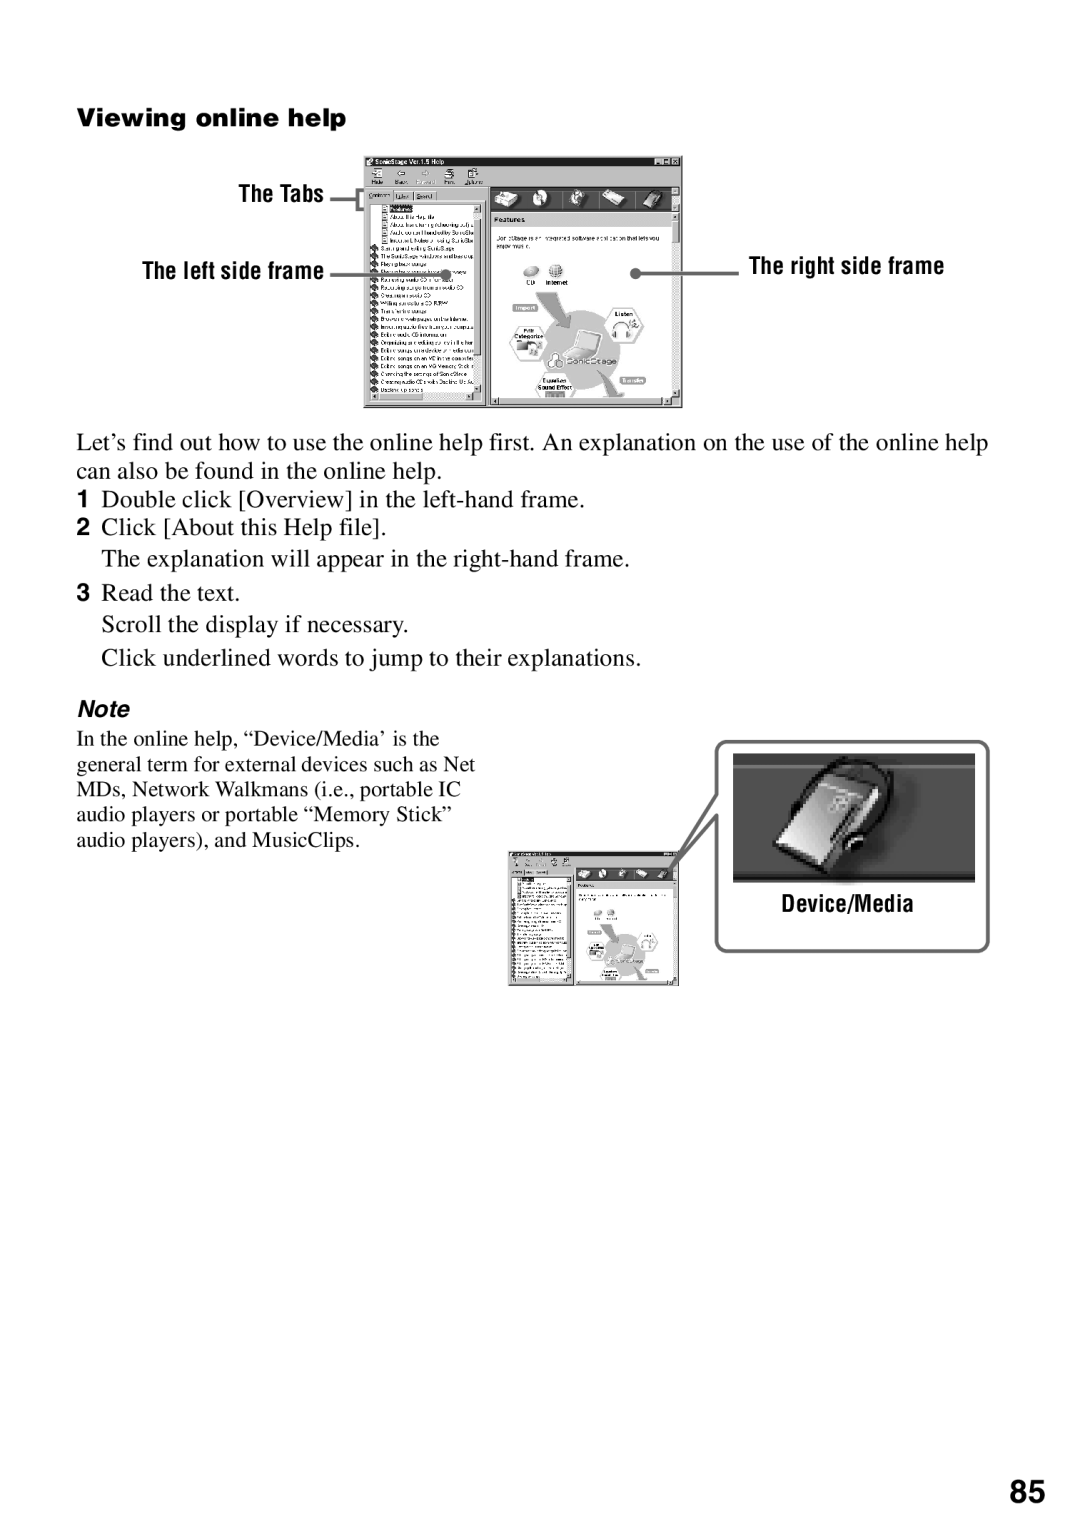 Sony MZ-N510 operating instructions Viewing online help The Tabs, The left side frame, Device/Media 